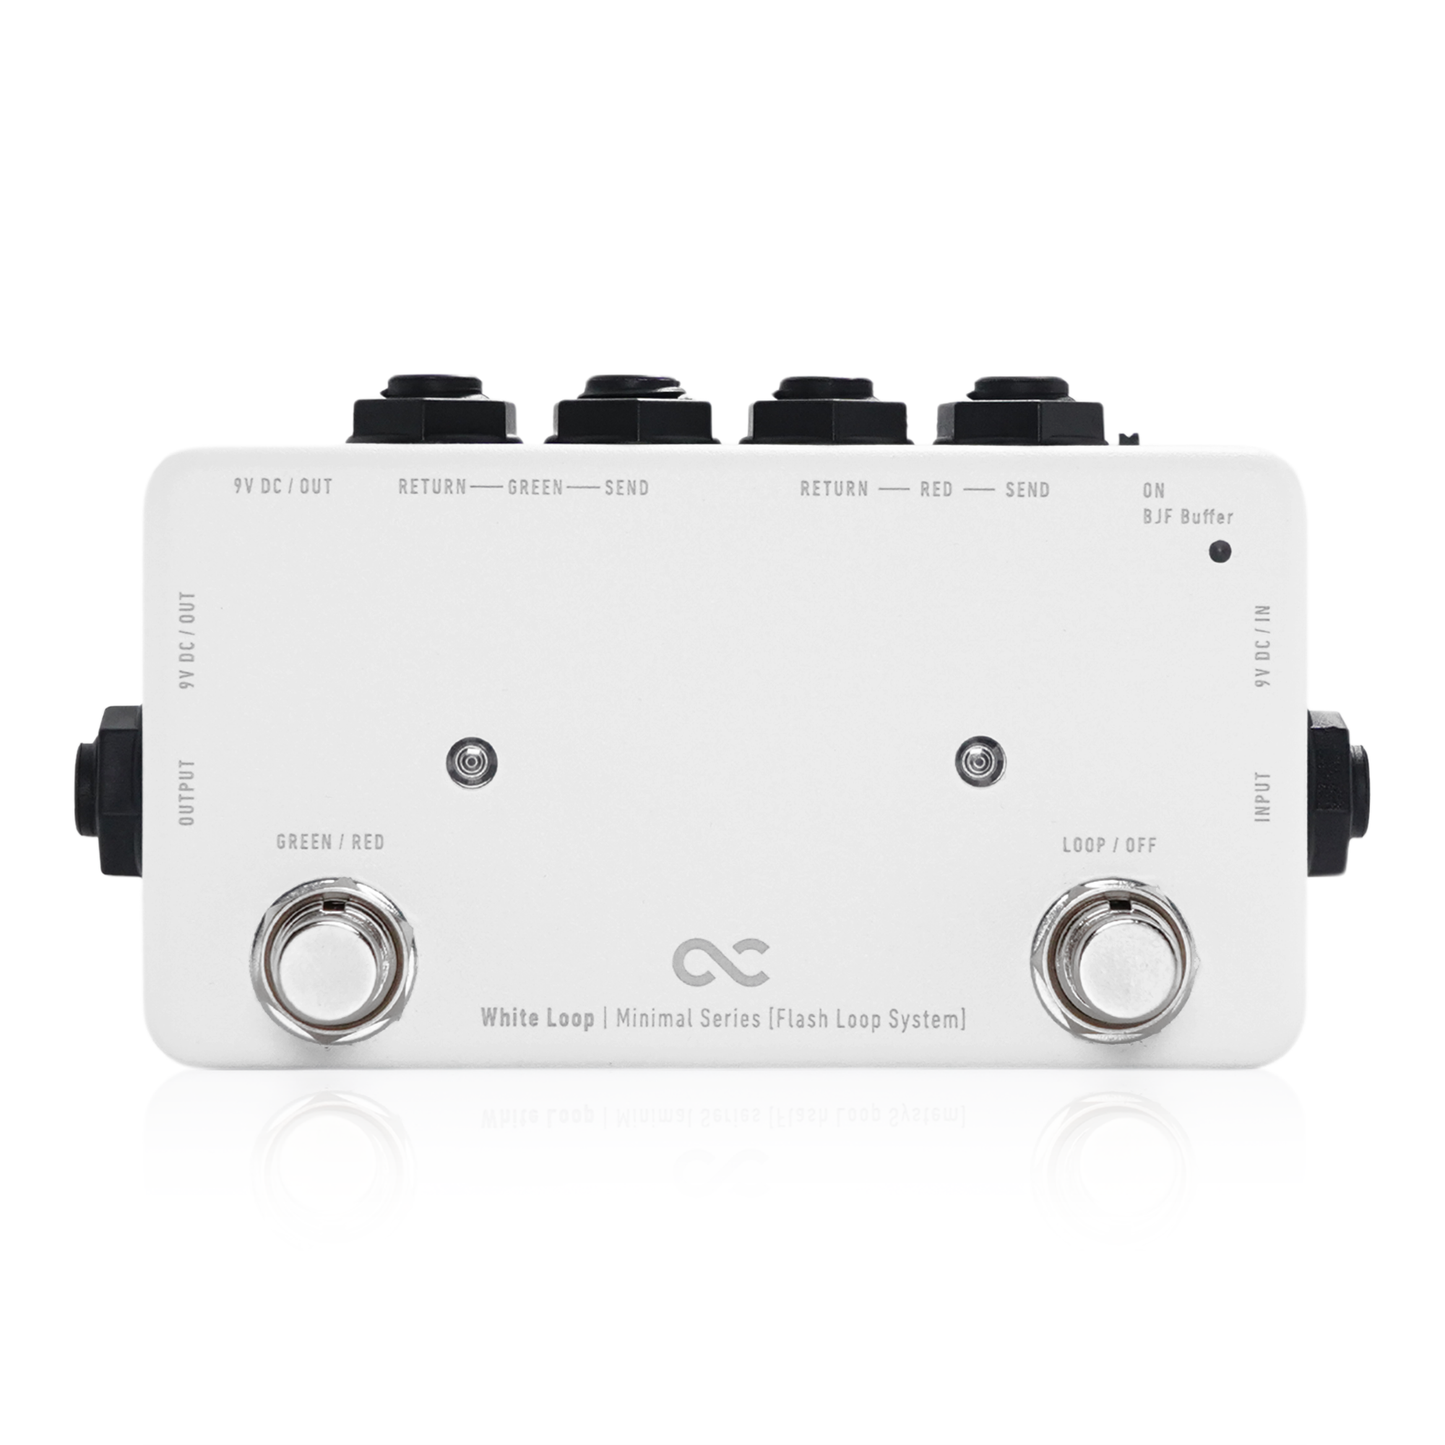 One Control / Minimal Series White Loop with BJF Buffer